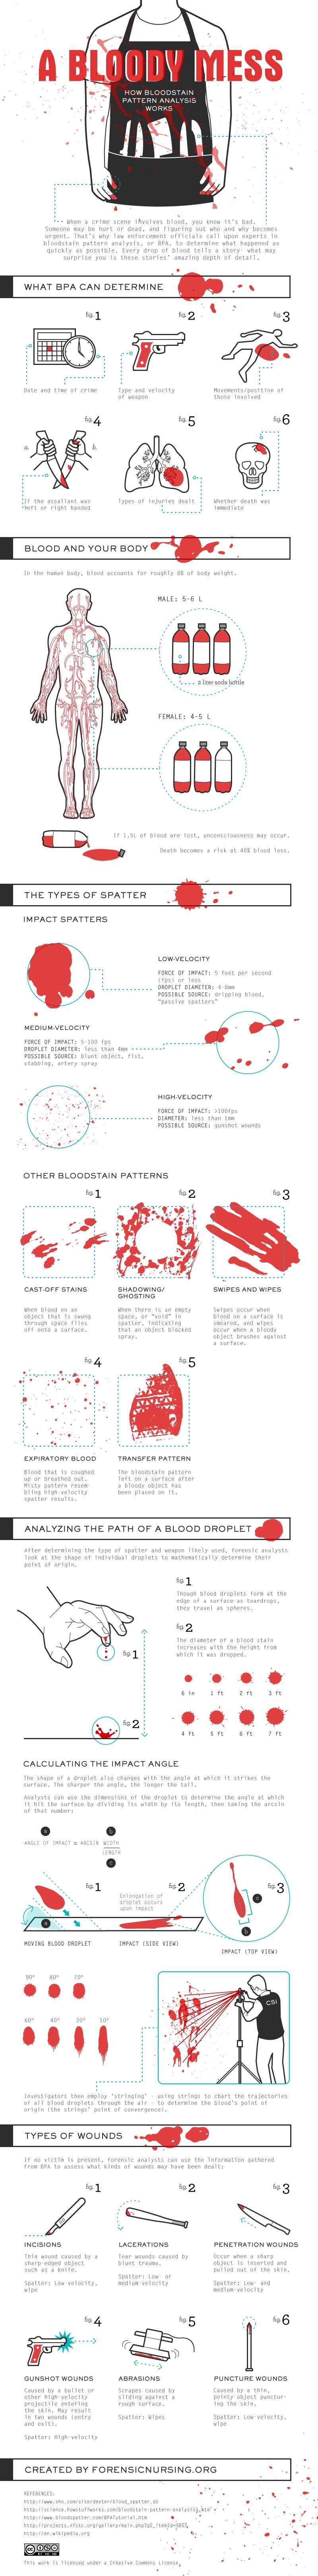 Bloodstain Pattern Analysis Infographic 